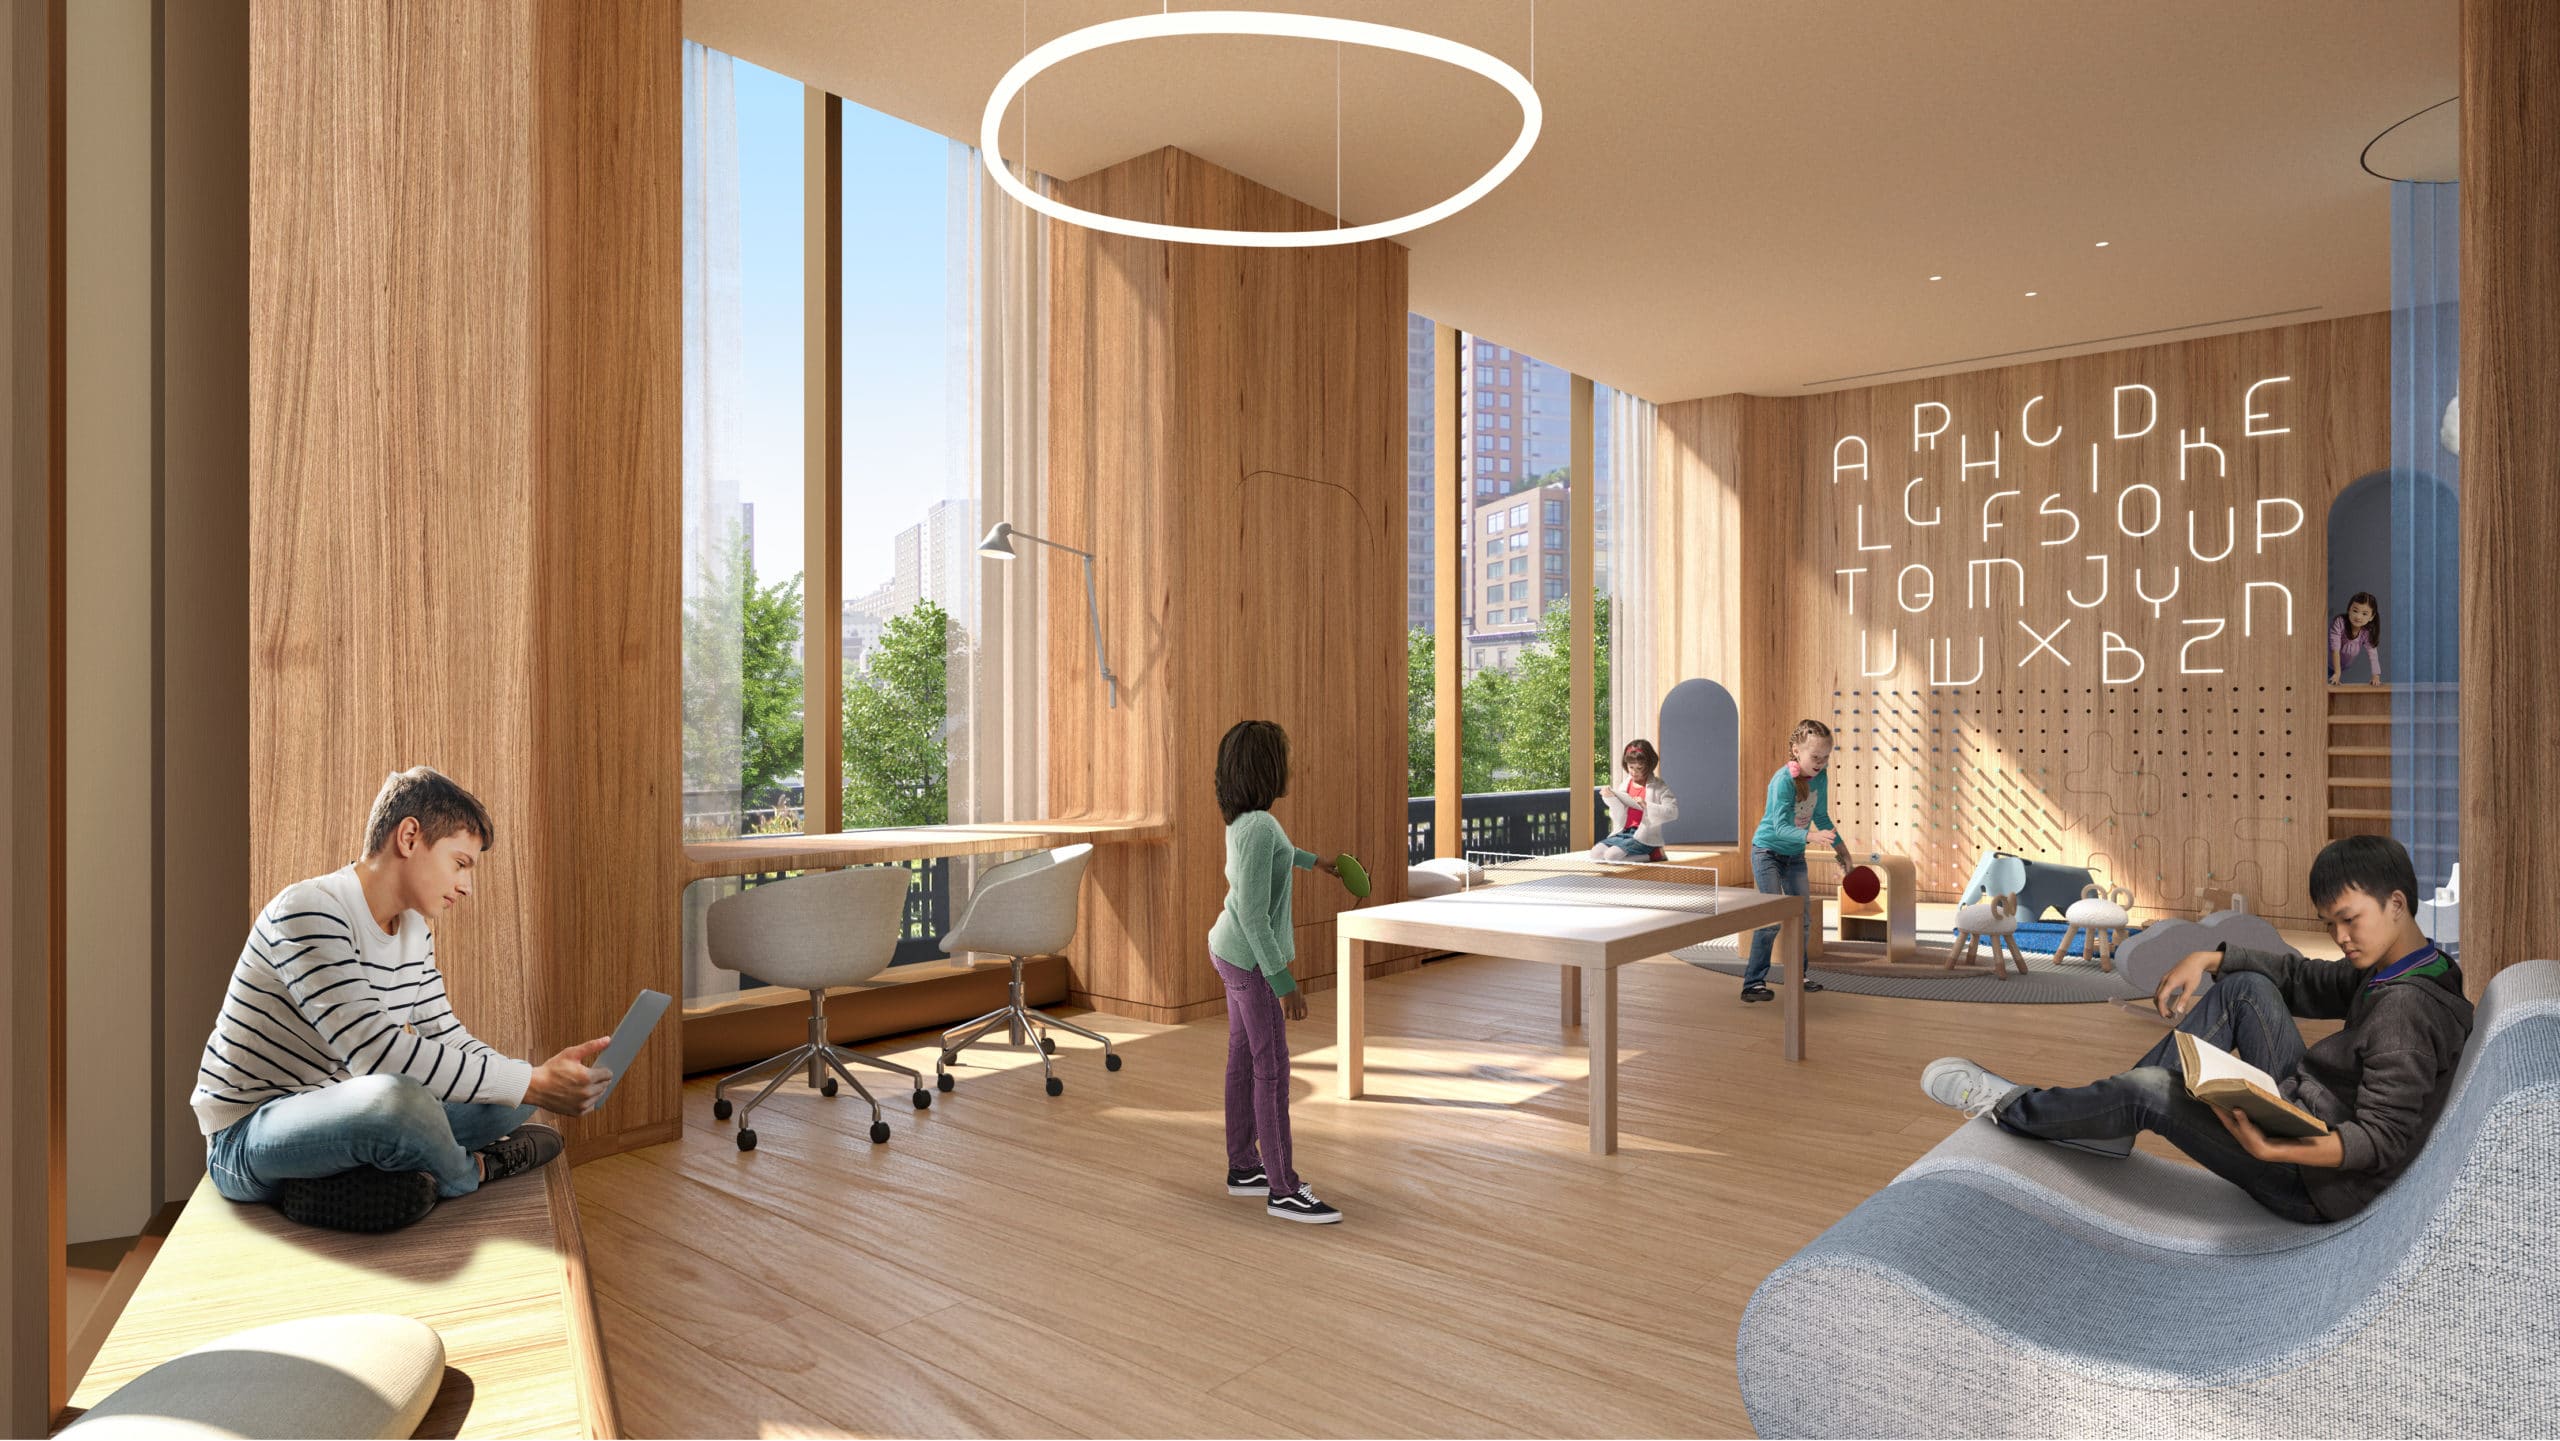 The playroom at The Xi luxury condos in NYC. Large room with chairs, couches, toys, and large windows with views.